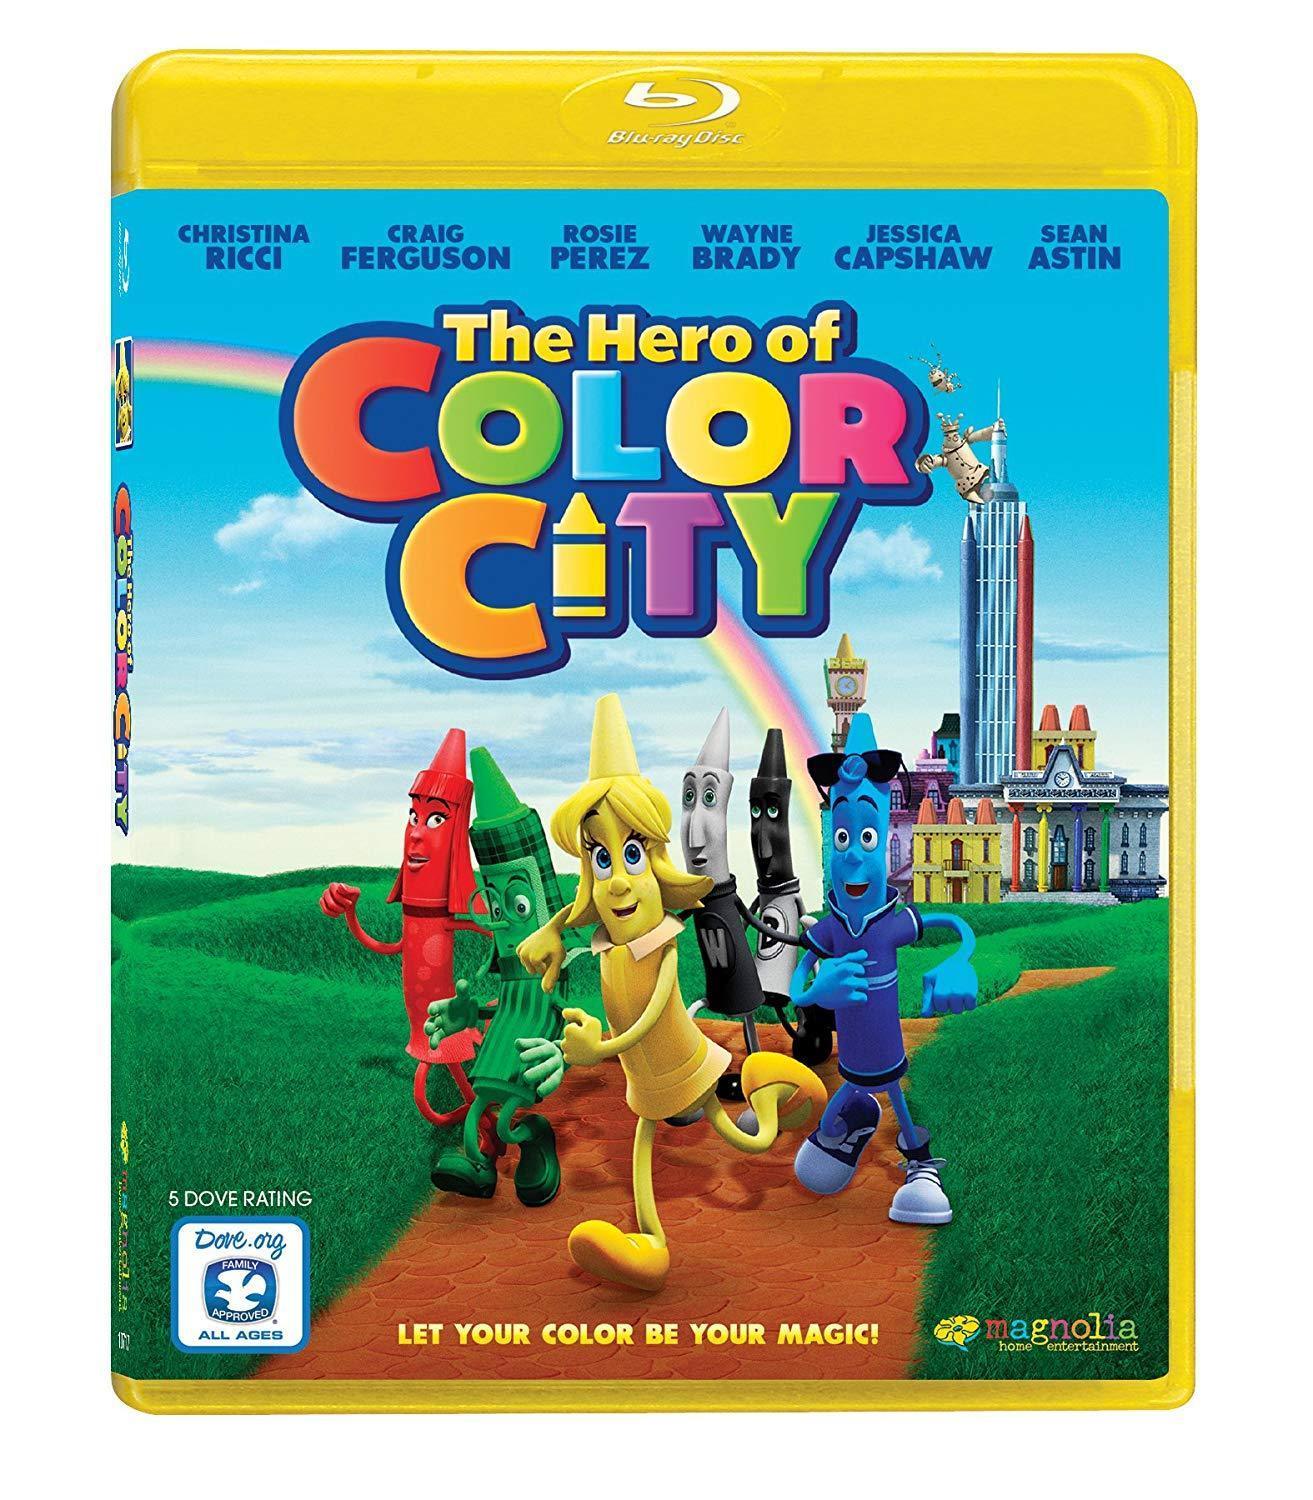 The Hero Of Color City on Blu-Ray Blaze DVDs DVDs & Blu-ray Discs > Blu-ray Discs